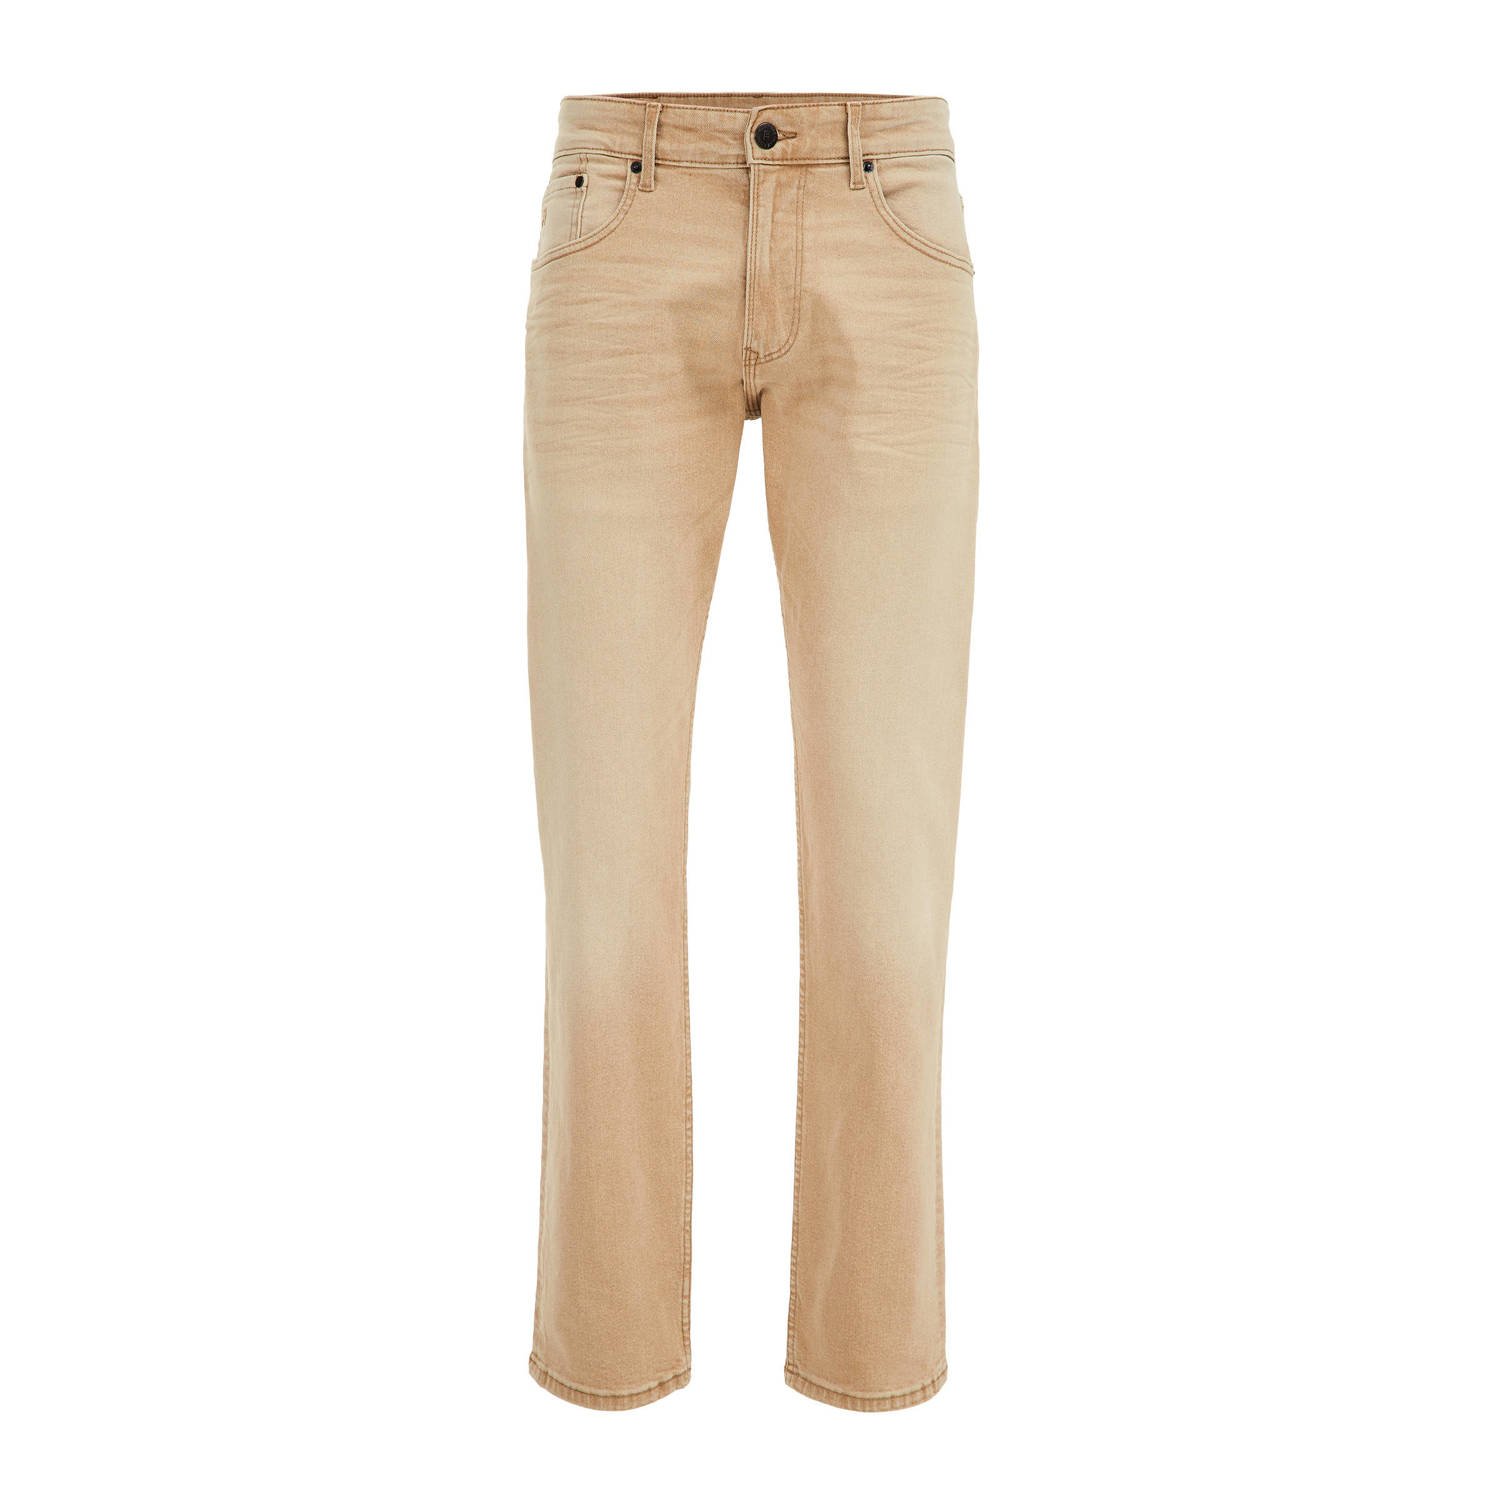 WE Fashion straight fit jeans sand